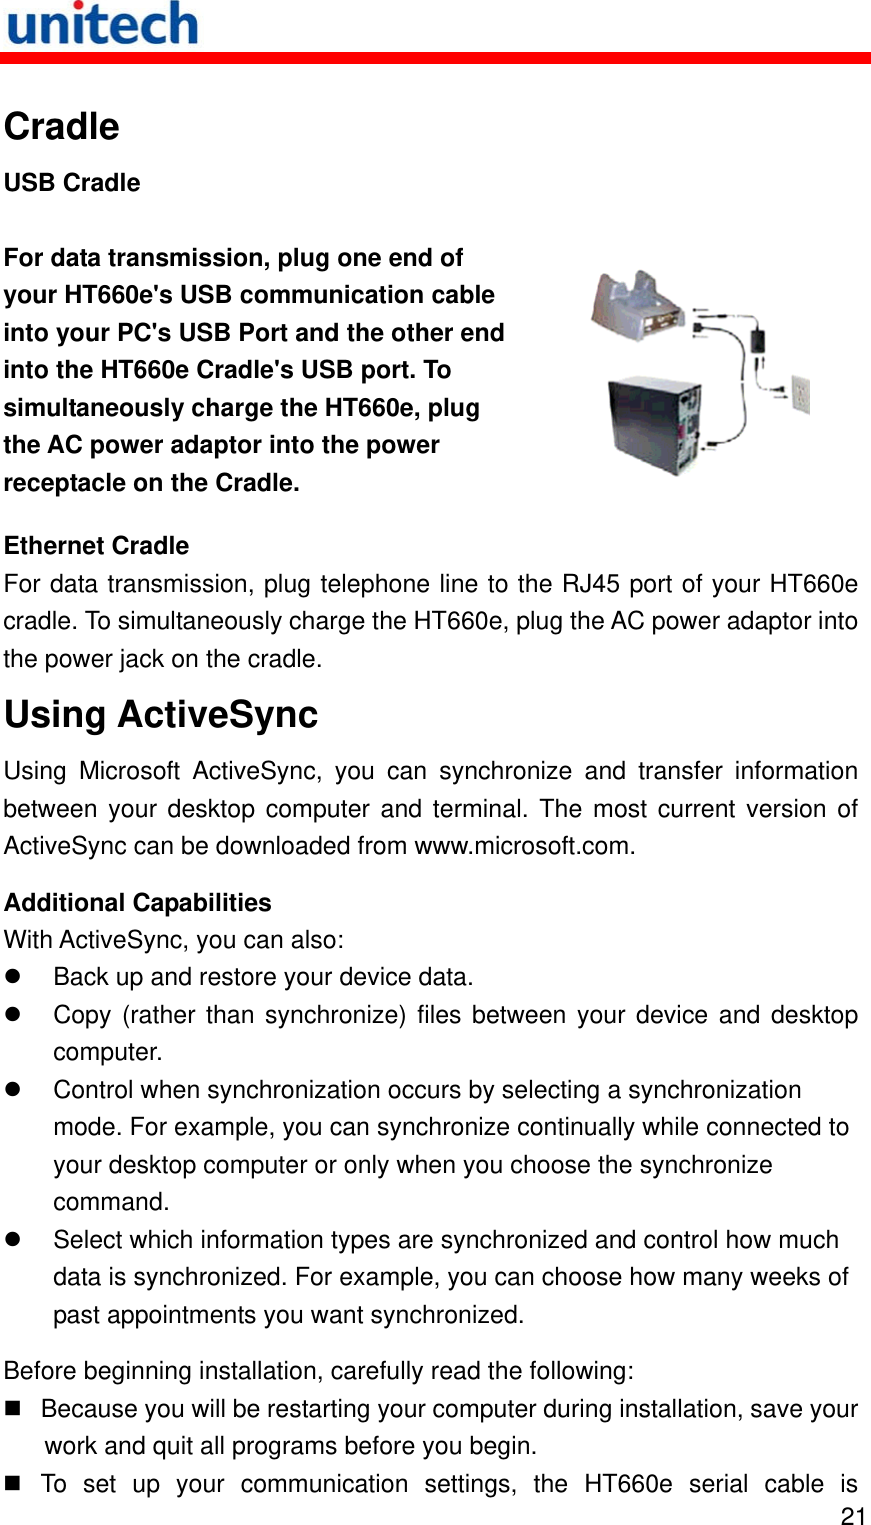   21 Cradle USB Cradle For data transmission, plug one end of your HT660e&apos;s USB communication cable into your PC&apos;s USB Port and the other end into the HT660e Cradle&apos;s USB port. To simultaneously charge the HT660e, plug the AC power adaptor into the power receptacle on the Cradle.   Ethernet Cradle For data transmission, plug telephone line to the RJ45 port of your HT660e cradle. To simultaneously charge the HT660e, plug the AC power adaptor into the power jack on the cradle. Using ActiveSync Using Microsoft ActiveSync, you can synchronize and transfer information between your desktop computer and terminal. The most current version of ActiveSync can be downloaded from www.microsoft.com. Additional Capabilities With ActiveSync, you can also:   Back up and restore your device data.   Copy (rather than synchronize) files between your device and desktop computer.   Control when synchronization occurs by selecting a synchronization mode. For example, you can synchronize continually while connected to your desktop computer or only when you choose the synchronize command.   Select which information types are synchronized and control how much data is synchronized. For example, you can choose how many weeks of past appointments you want synchronized. Before beginning installation, carefully read the following:  Because you will be restarting your computer during installation, save your work and quit all programs before you begin.  To set up your communication settings, the HT660e serial cable is 